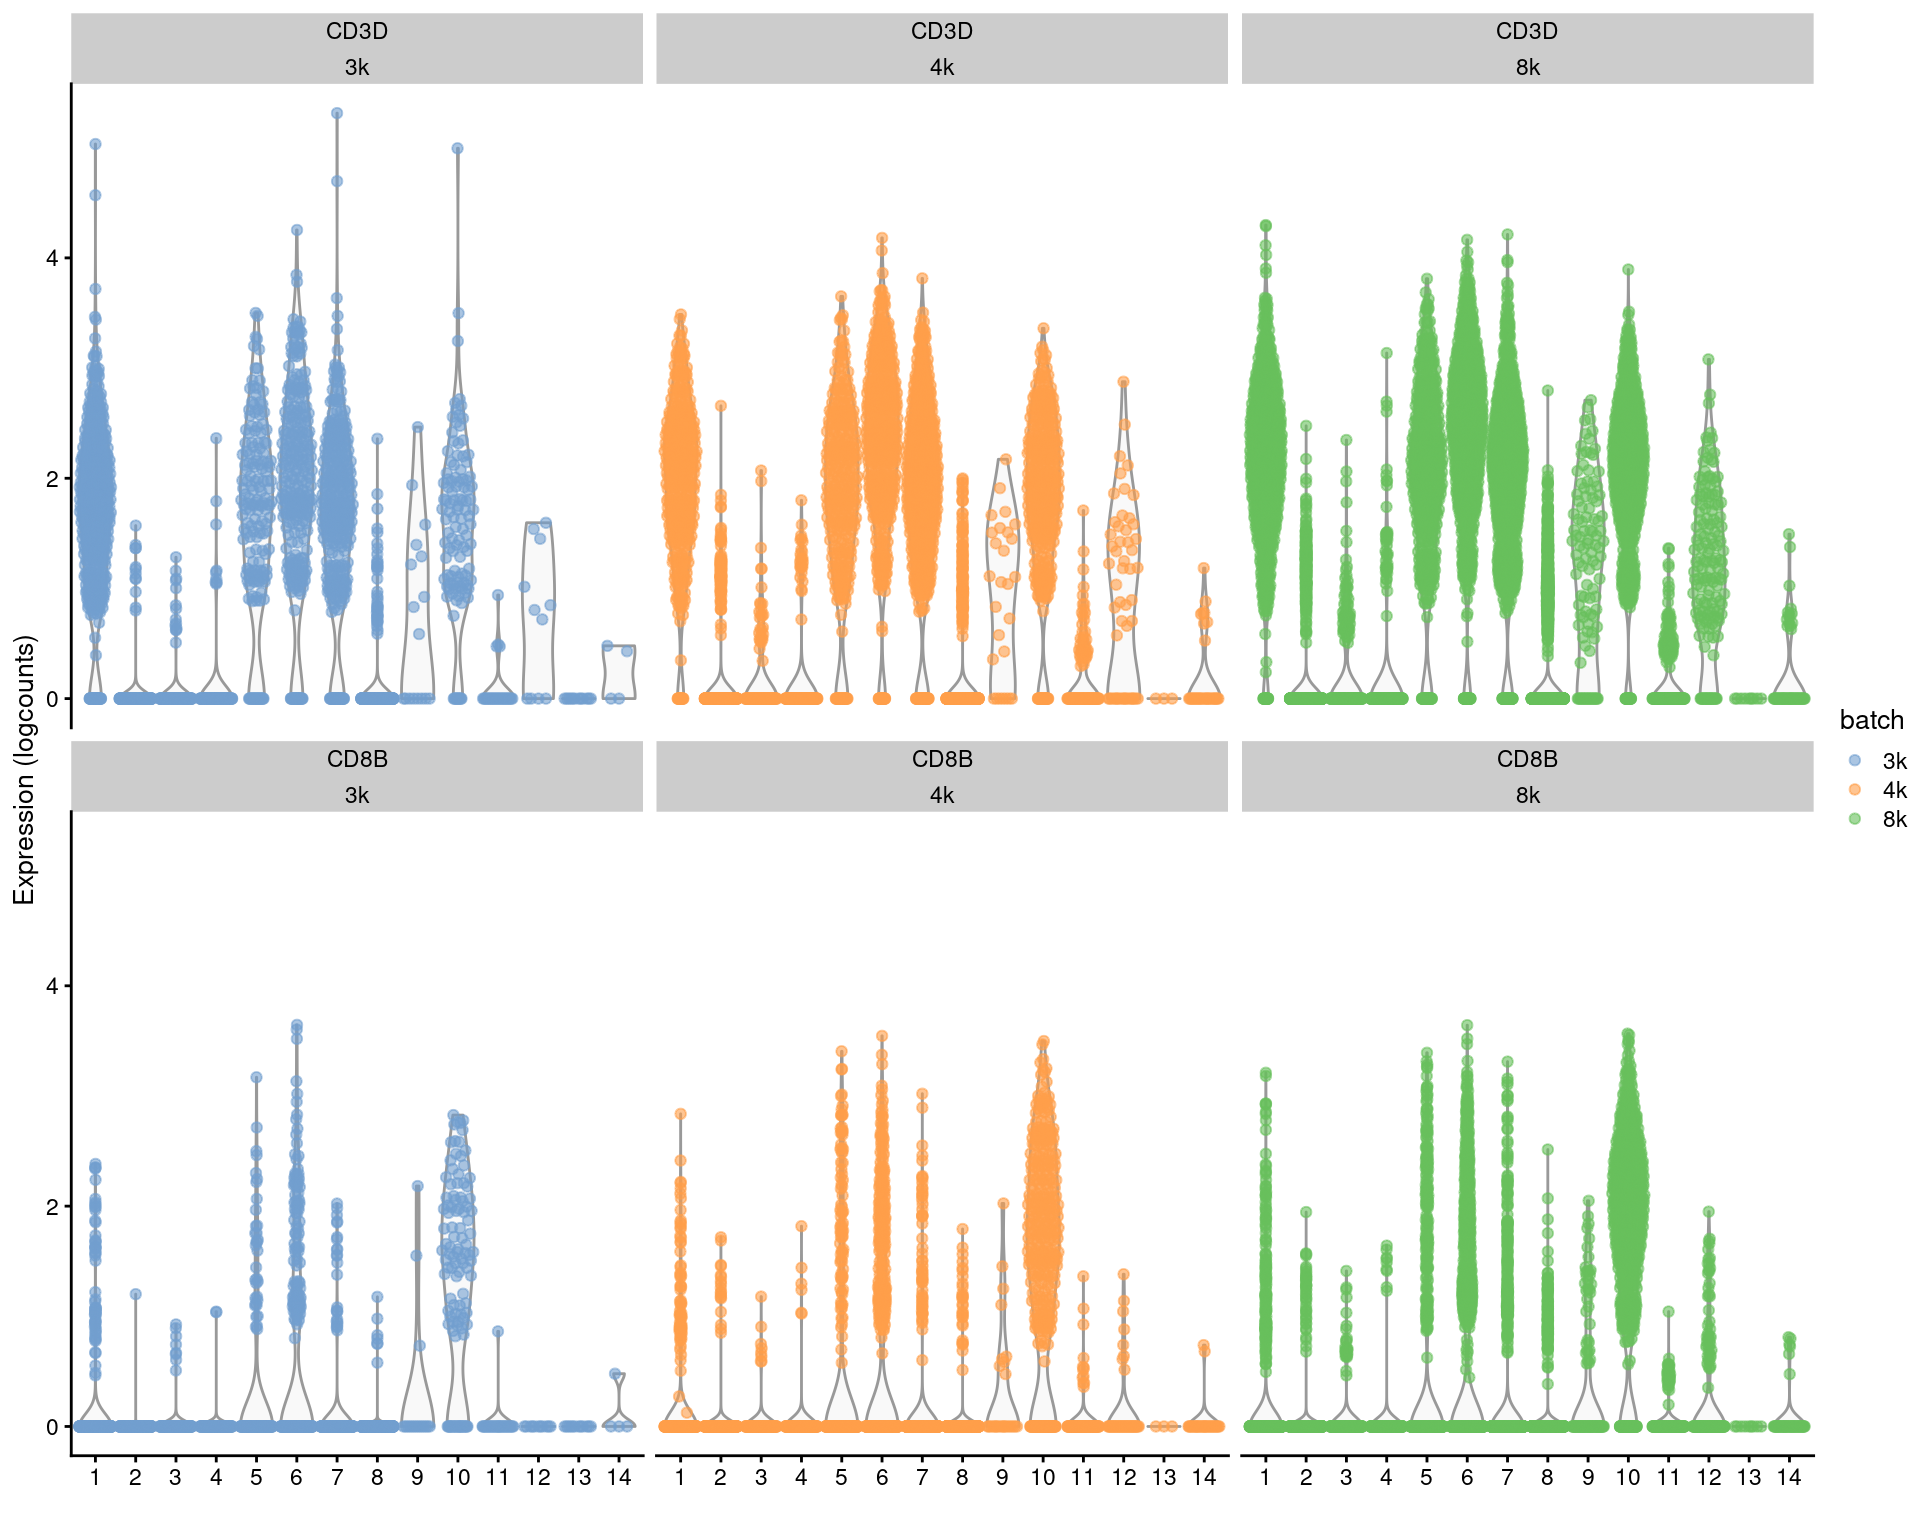 Distributions of uncorrected log-expression values for _CD8B_ and _CD3D_ within each cluster in each batch of the merged PBMC dataset.